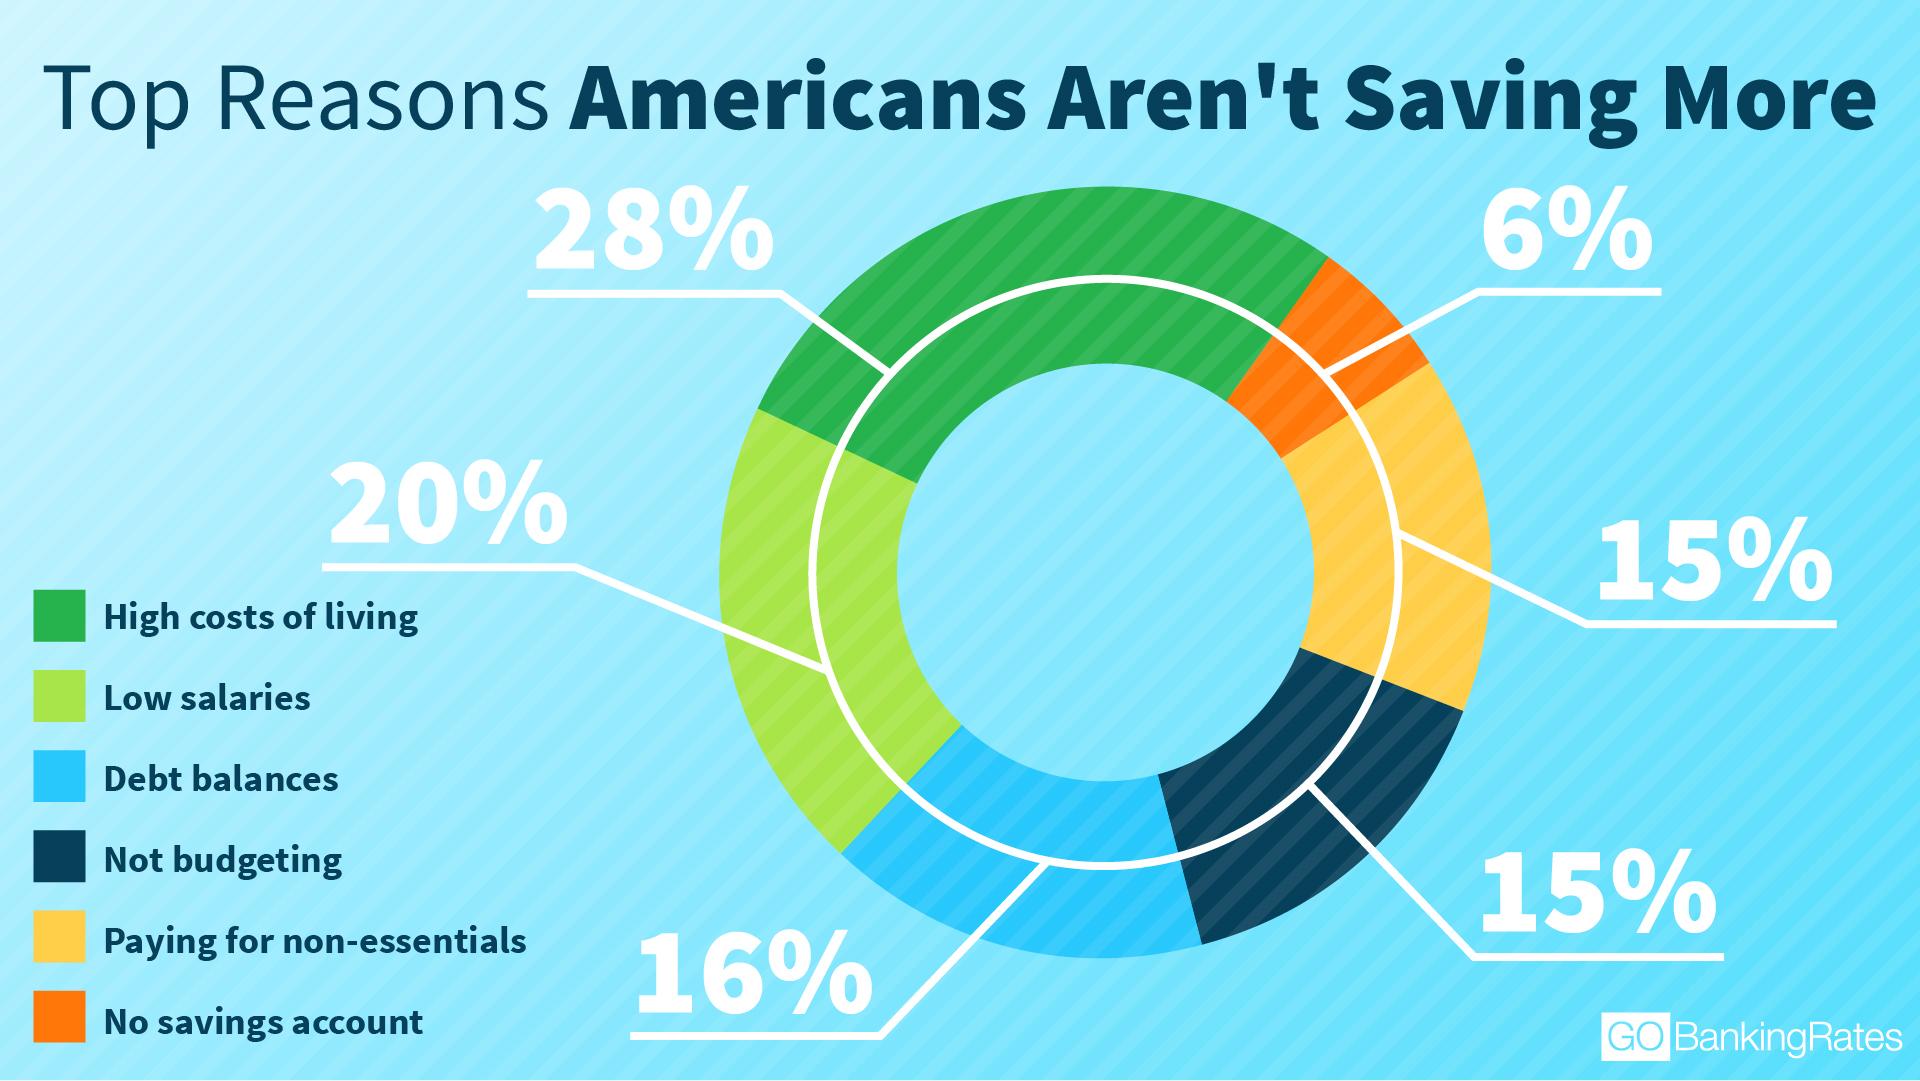 Americans Top Reasons for Not Saving More Infographic